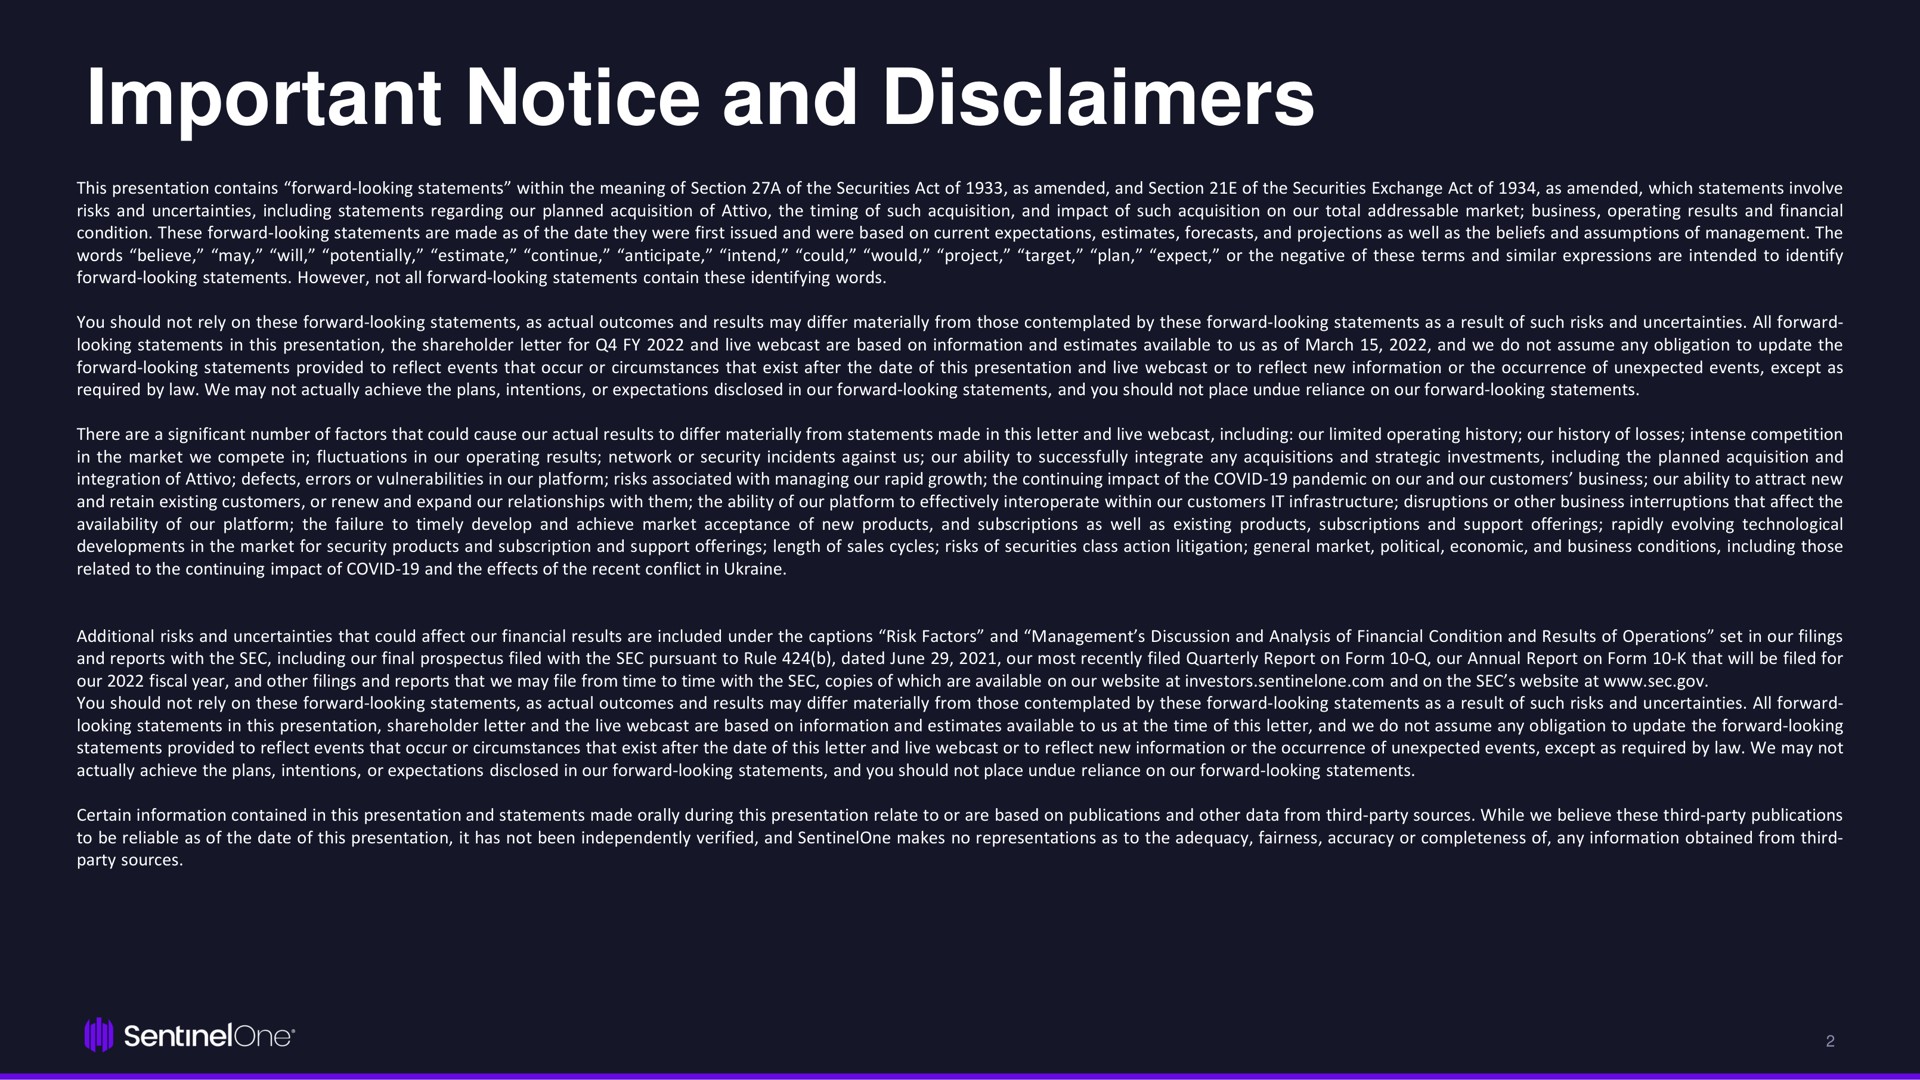 important notice and disclaimers | SentinelOne